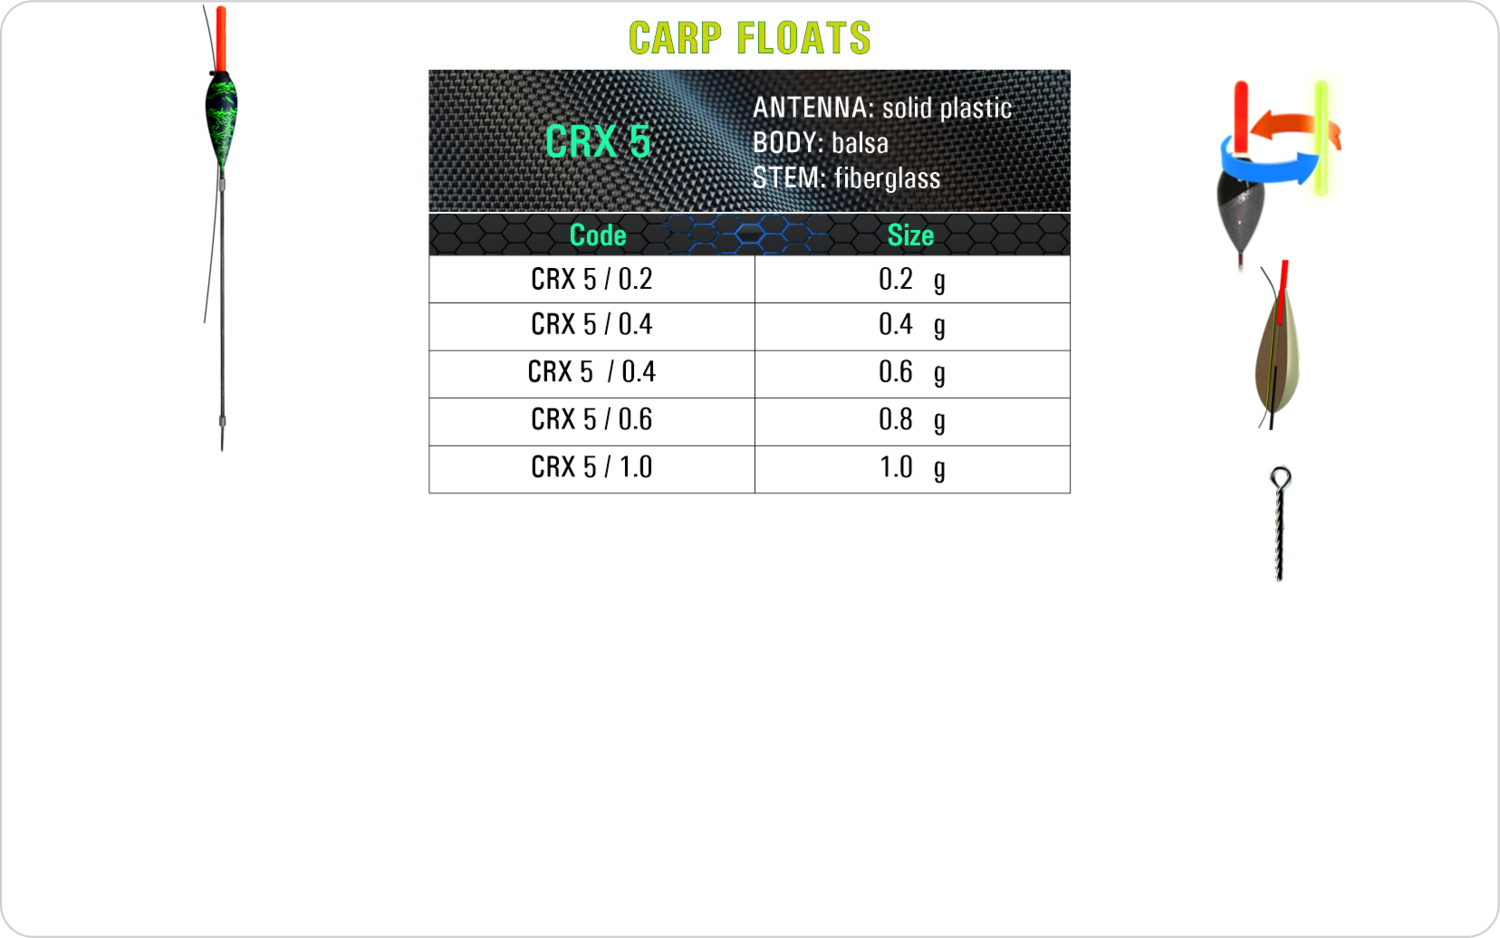 SF CRX 5 Carp float model and table containing an additional information about this float with different codes, sizes, types of the body, the stem and the antenna of the float.